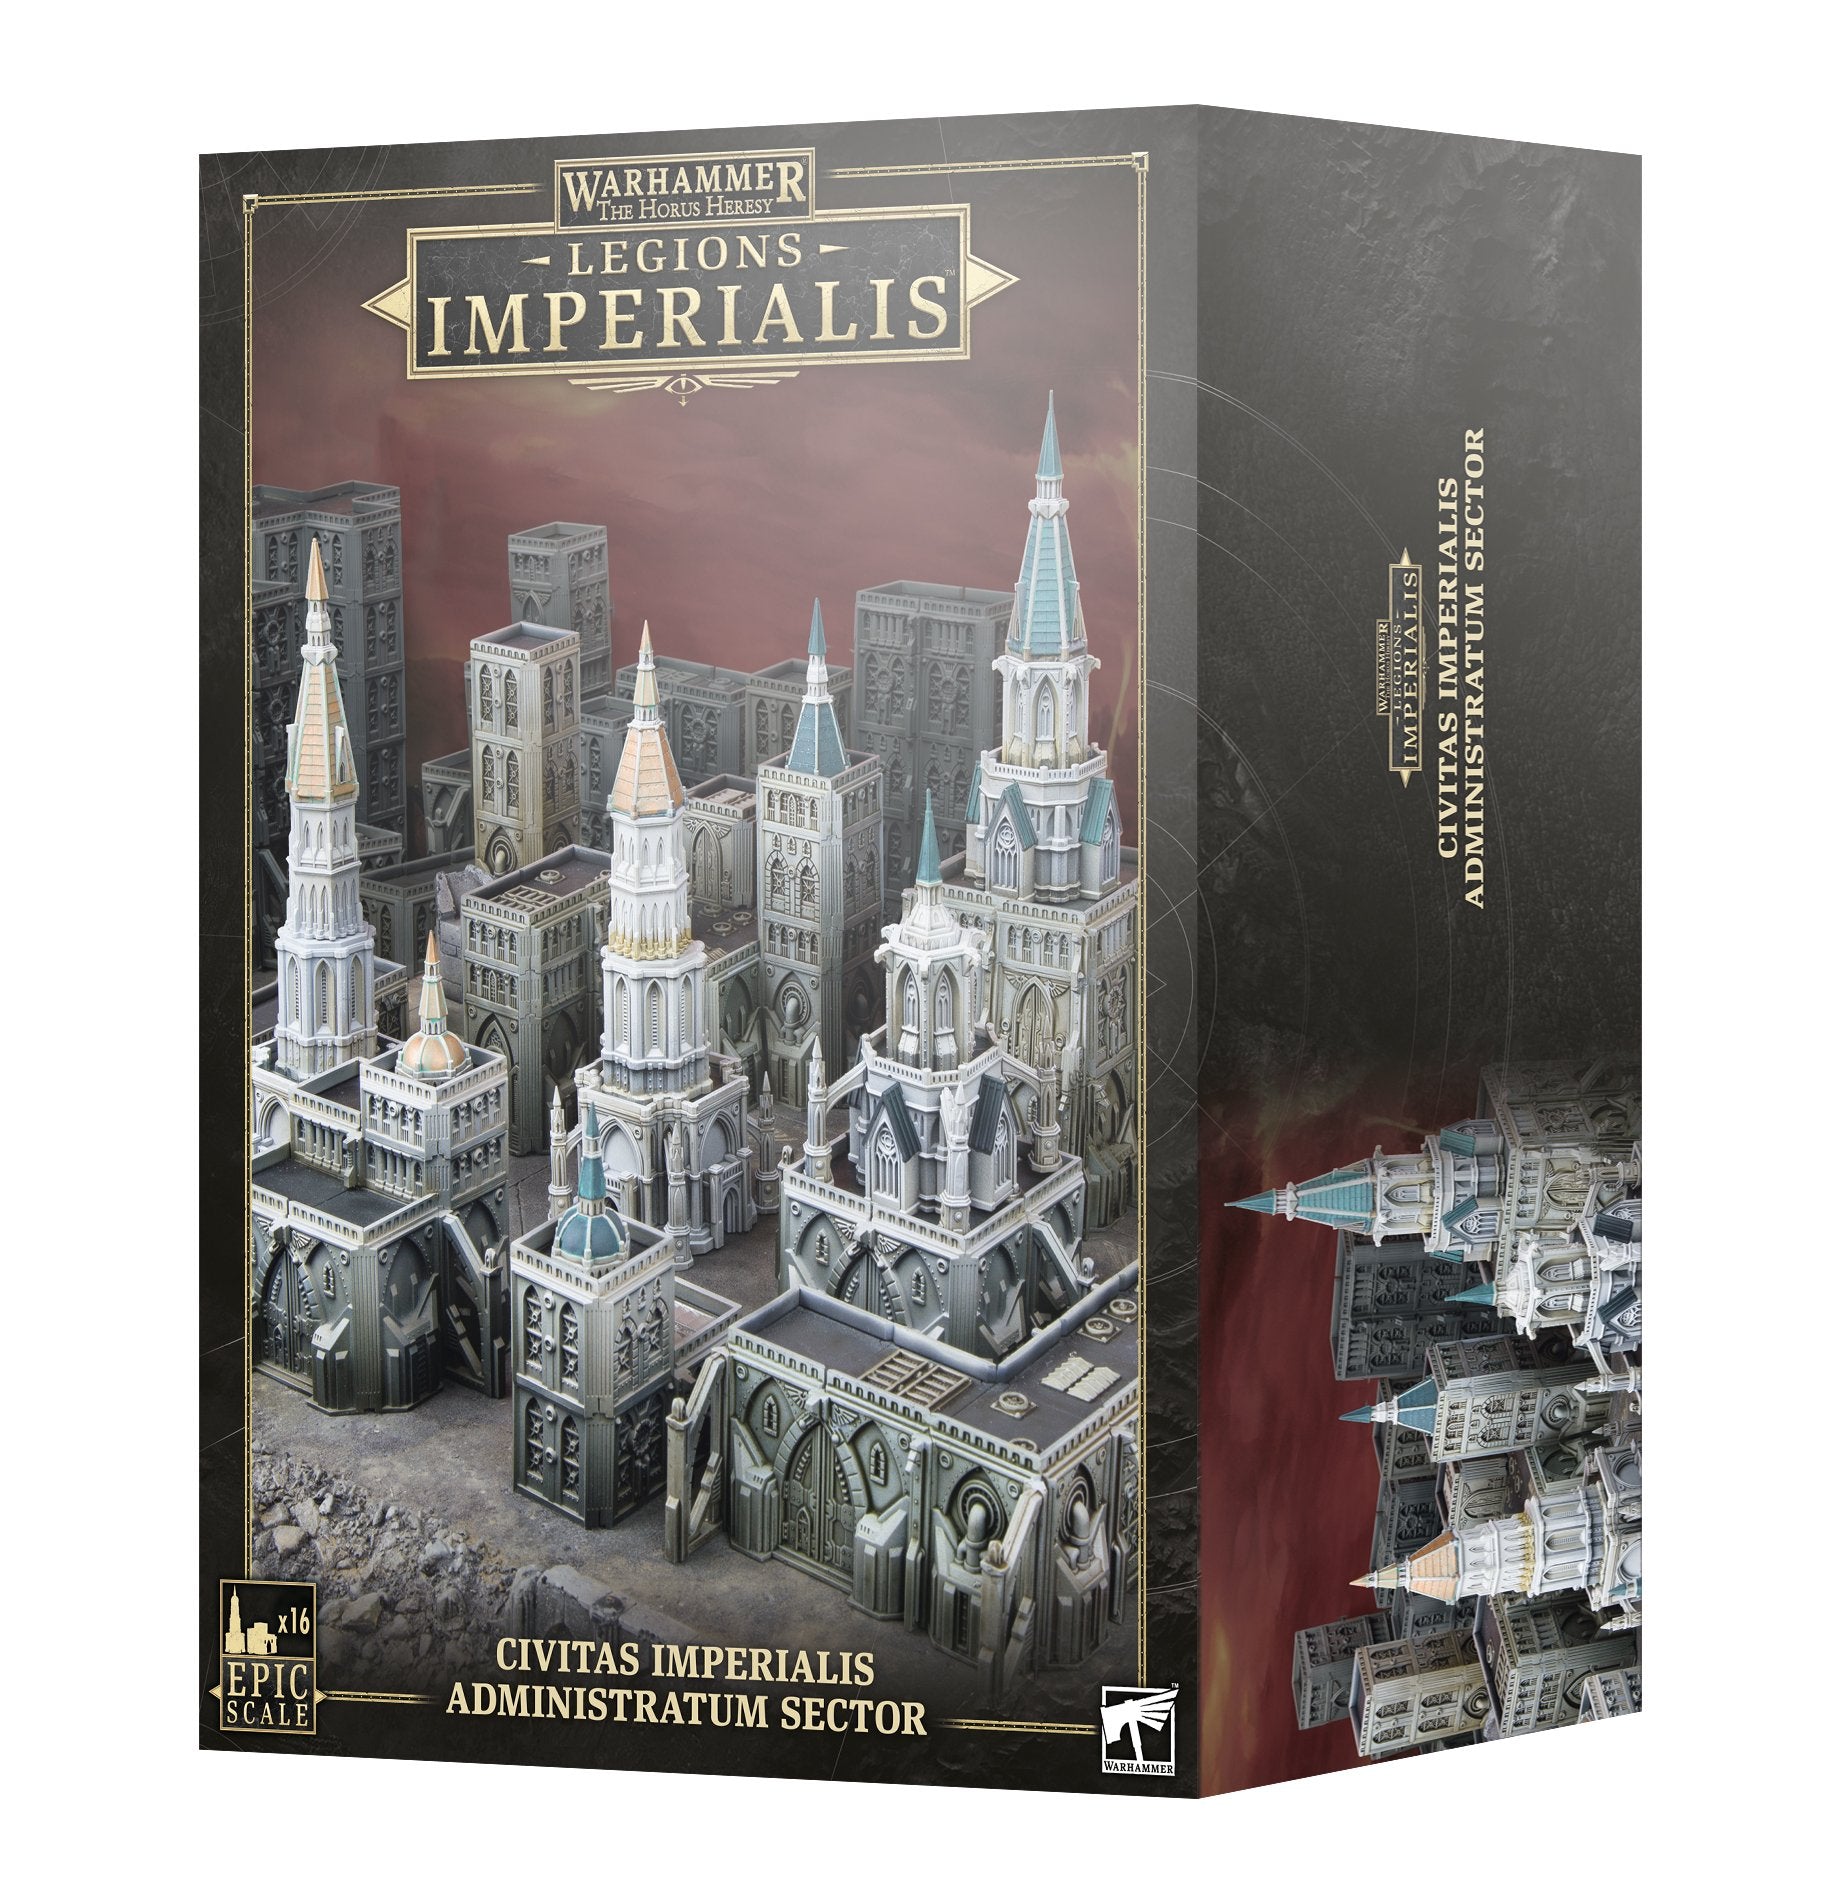 Legions Imperialis: Civitas Imperialis Administratum Sector - Release Date 2/12/23 - Loaded Dice Barry Vale of Glamorgan CF64 3HD